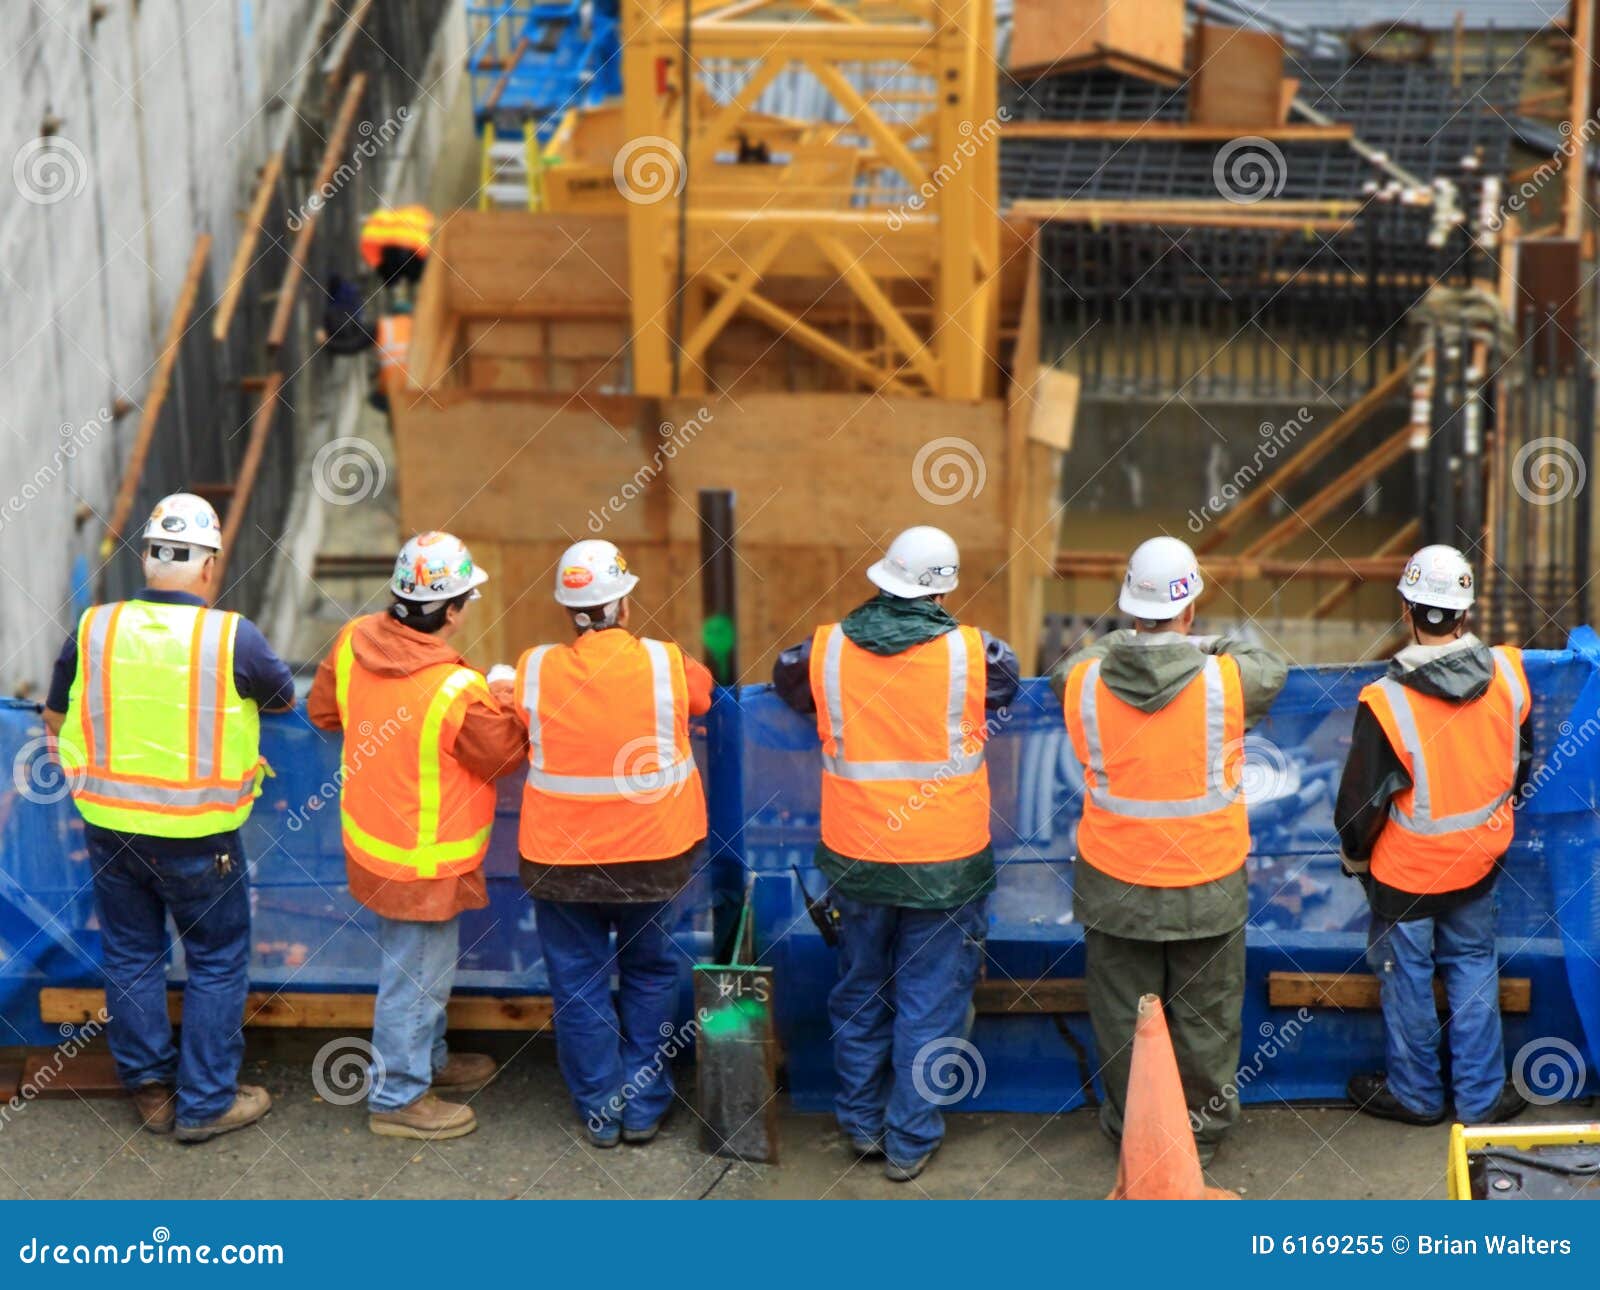 six construction workers